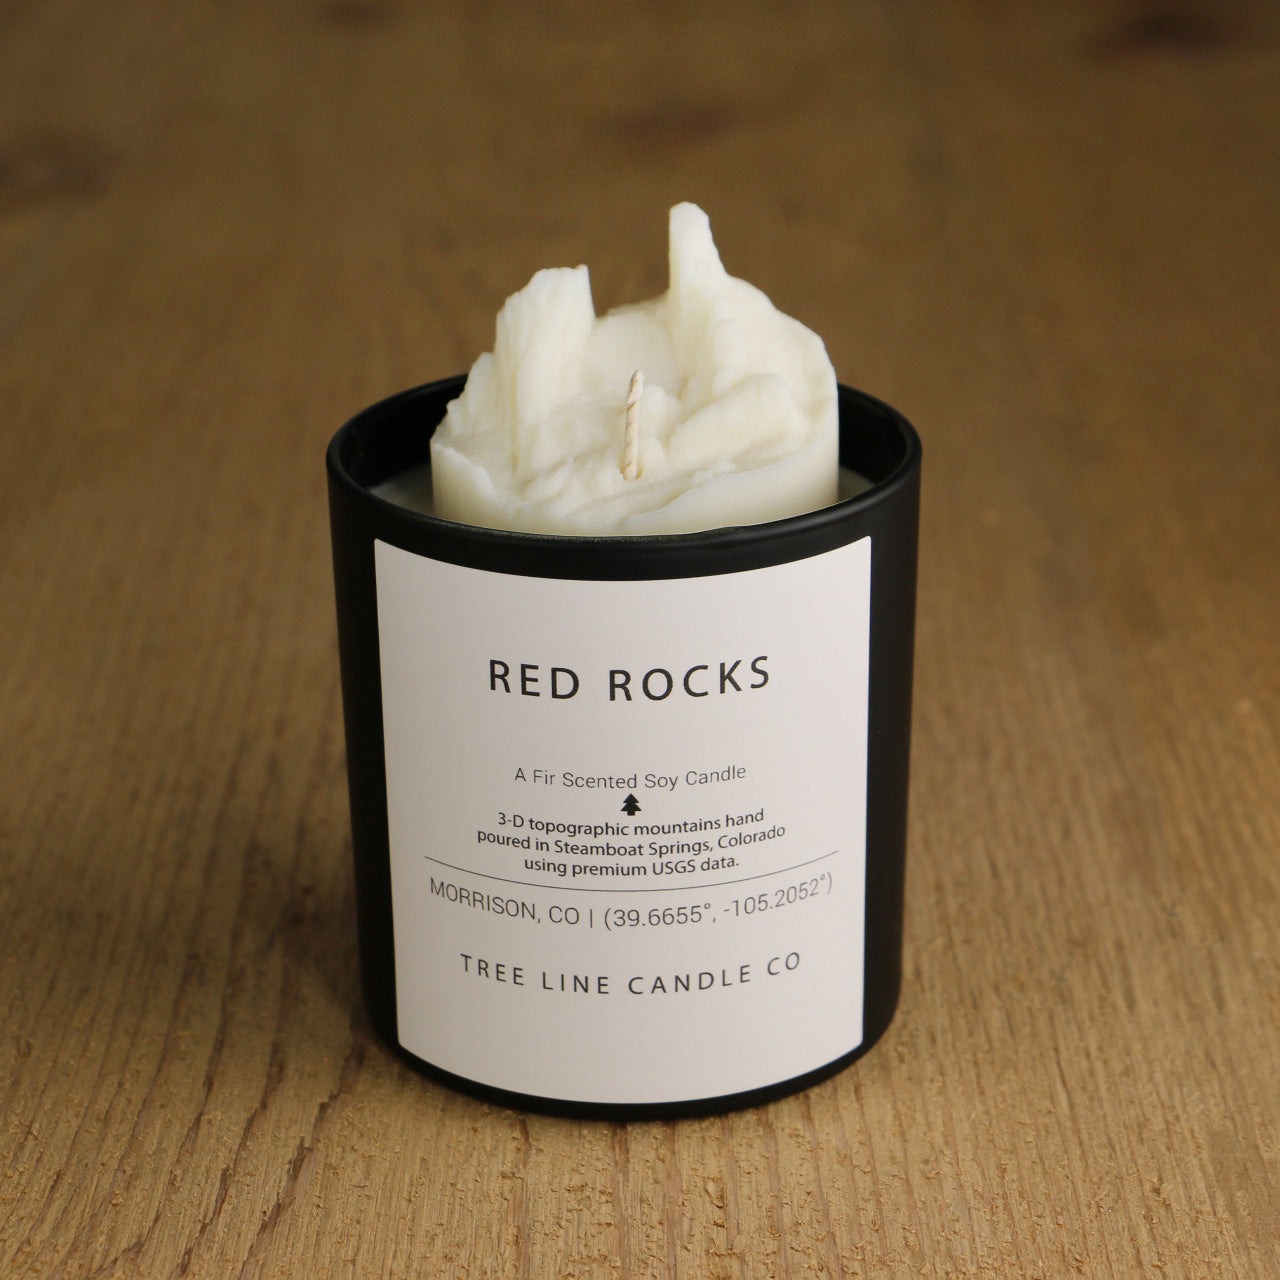  A white soy wax replica candle of Red Rocks area in a round, black glass.